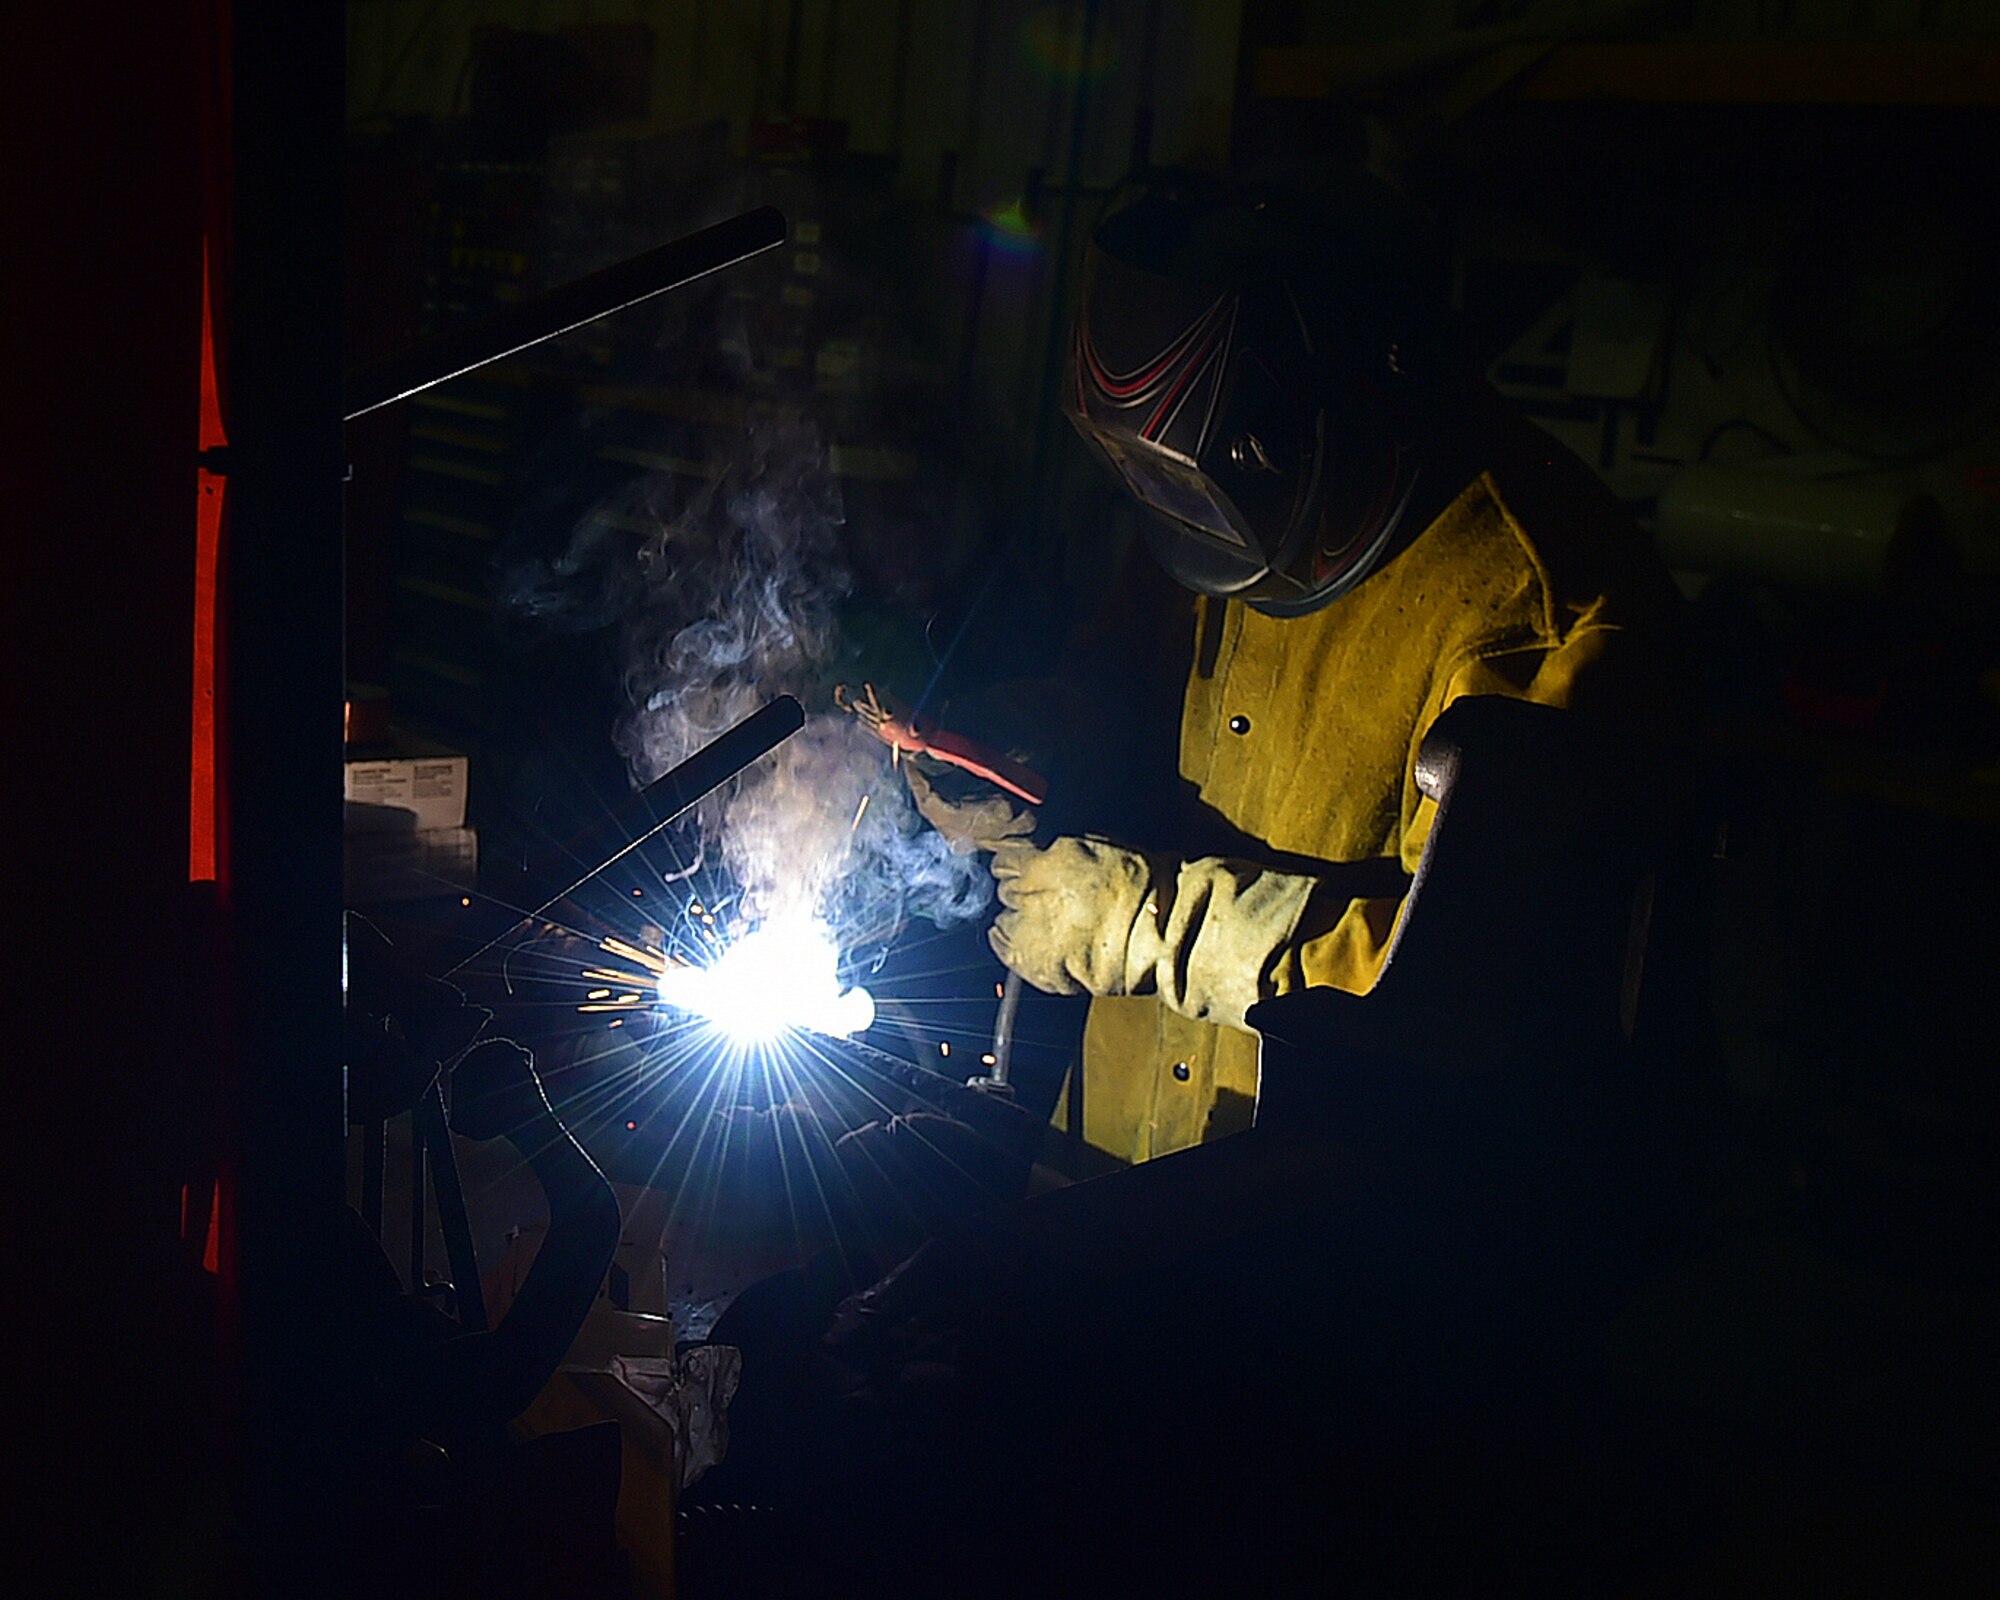 Staff Sgt. Rodel Lalap, 386th Vehicle Management Flight, mission generation vehicular equipment maintenance journeyman, welds digging blades for reuse at an undisclosed in Southwest Asia, Jan. 4, 2016 supporting Operation INHERENT RESOLVE. The flight’s welding capabilities enable them to repair cracked vehicle panels, damaged construction equipment and steel construction frames. They are also able to make custom tools when needed. (U.S. Air Force photo by Staff Sgt. Jerilyn Quintanilla)